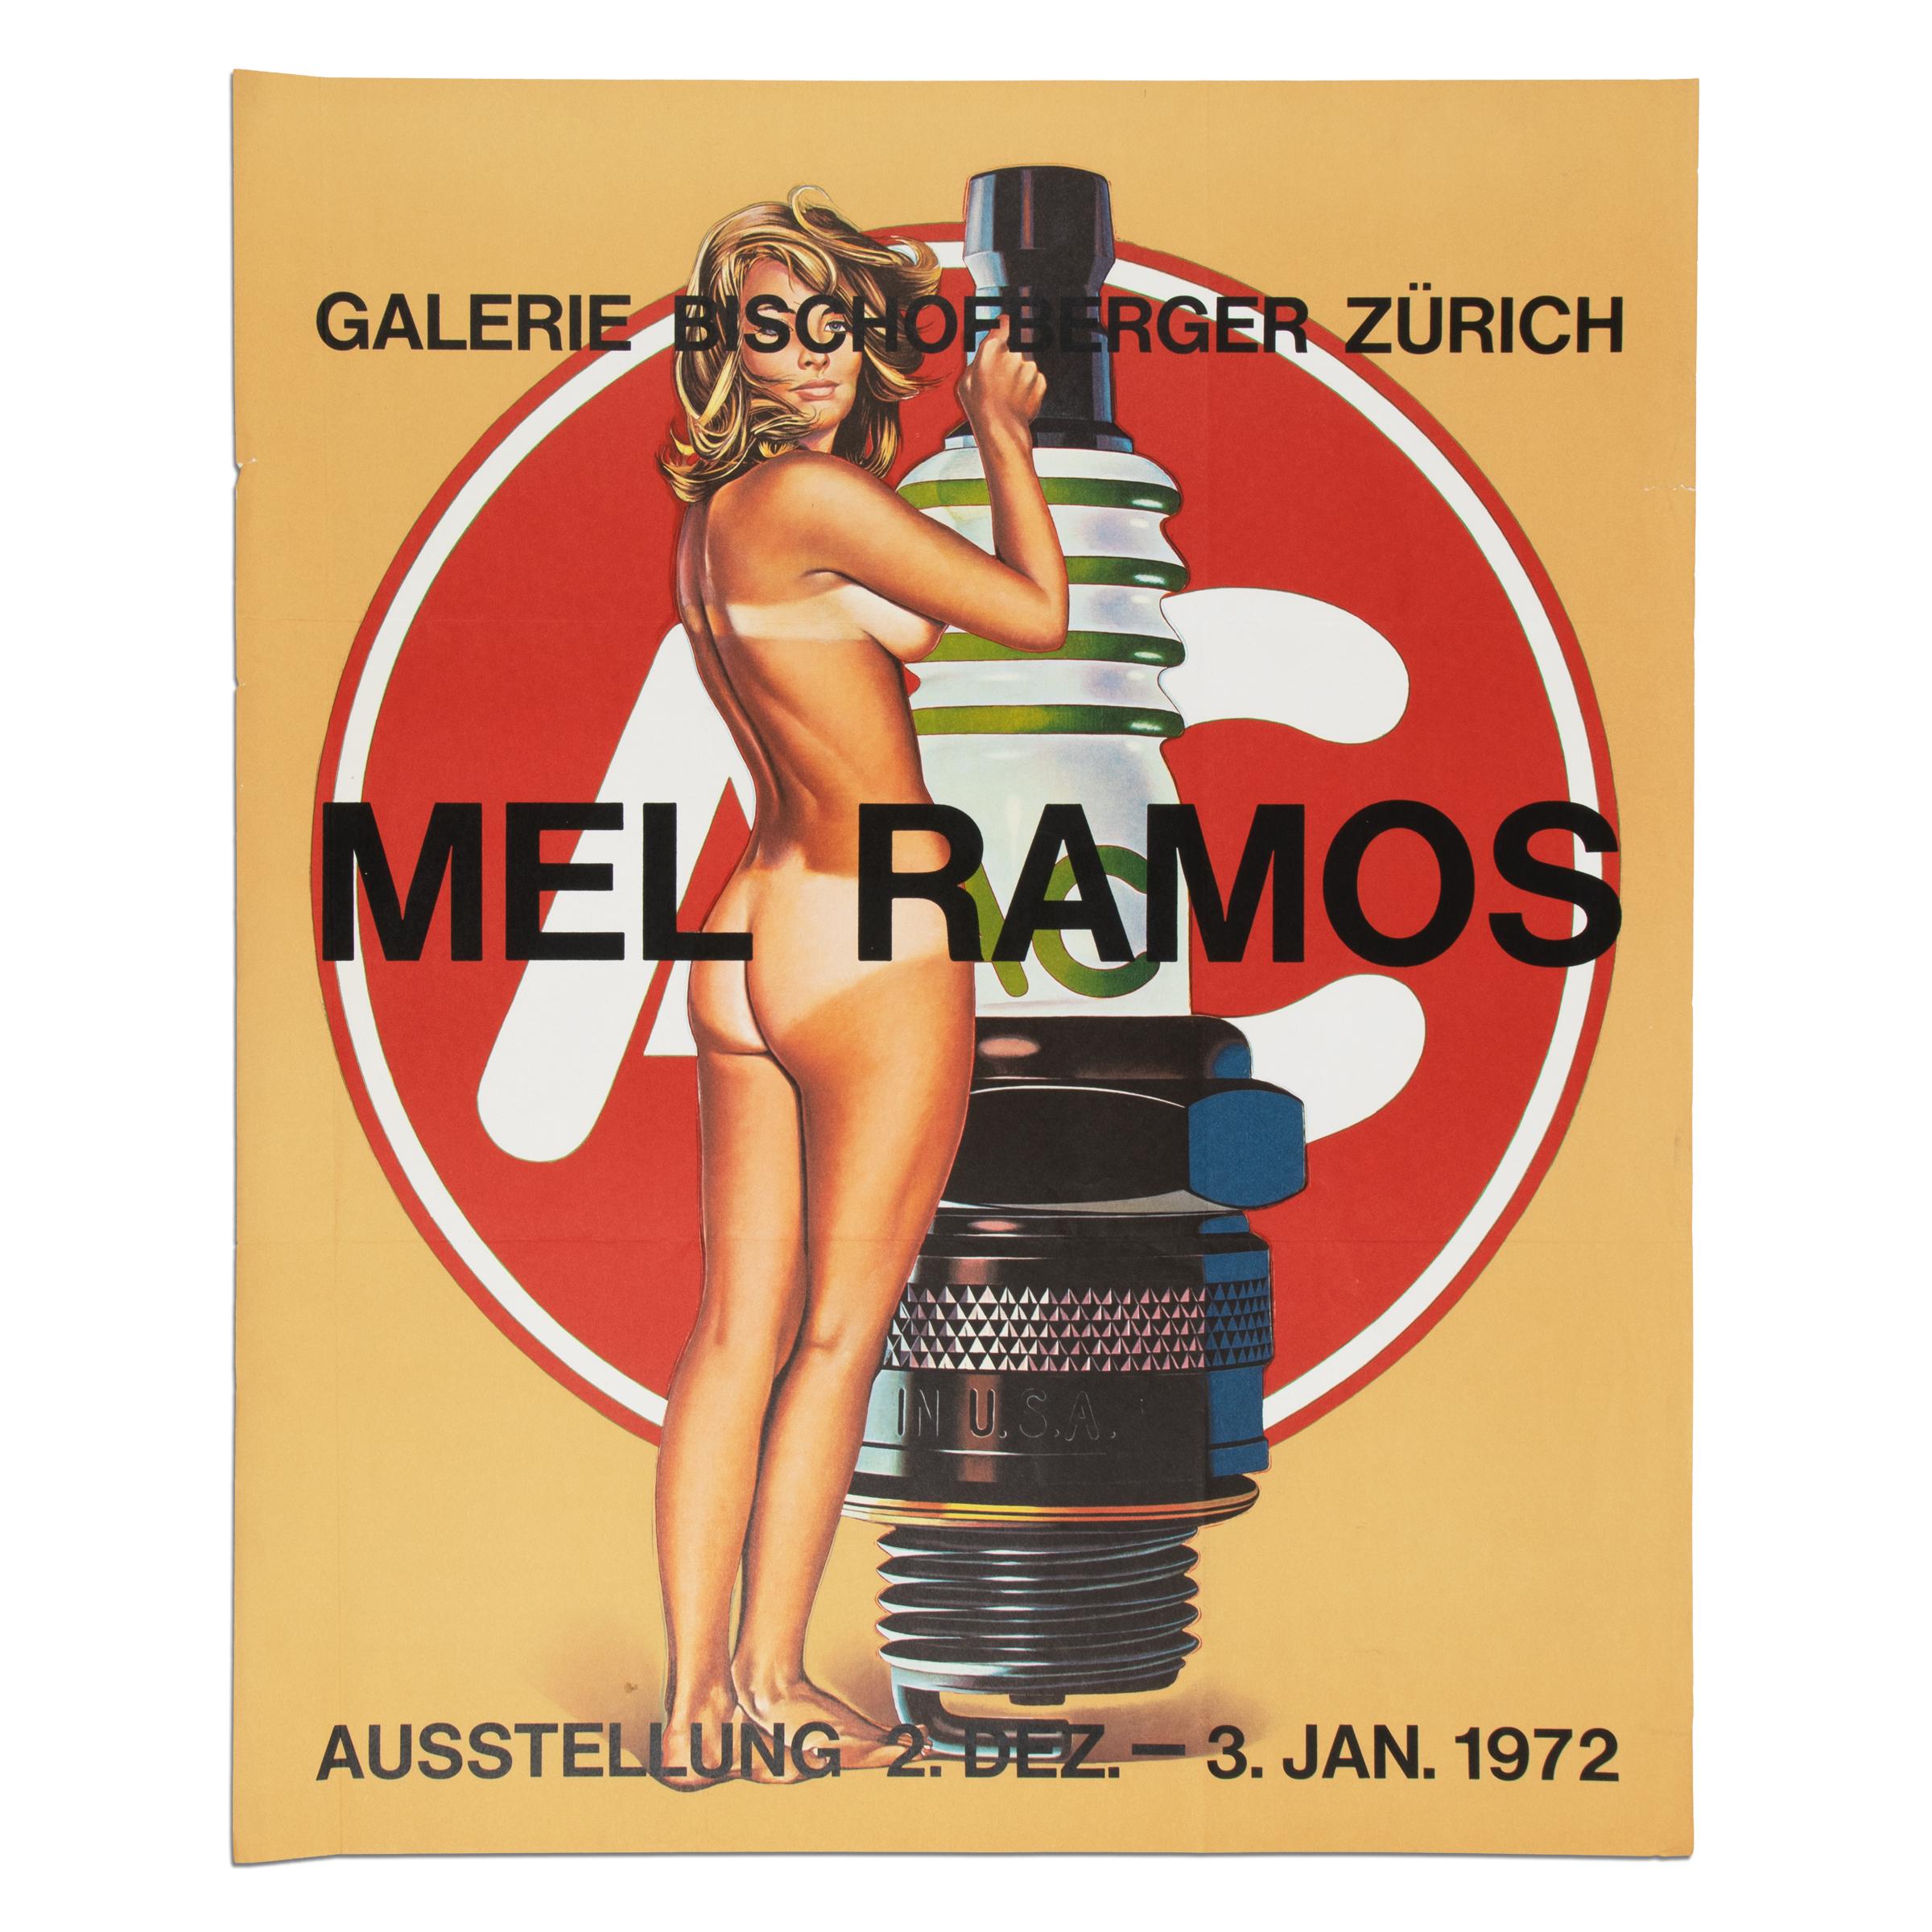 Original poster for the exhibition "Mel Ramos" at Galerie Bischofberger in Zürich in 1972.